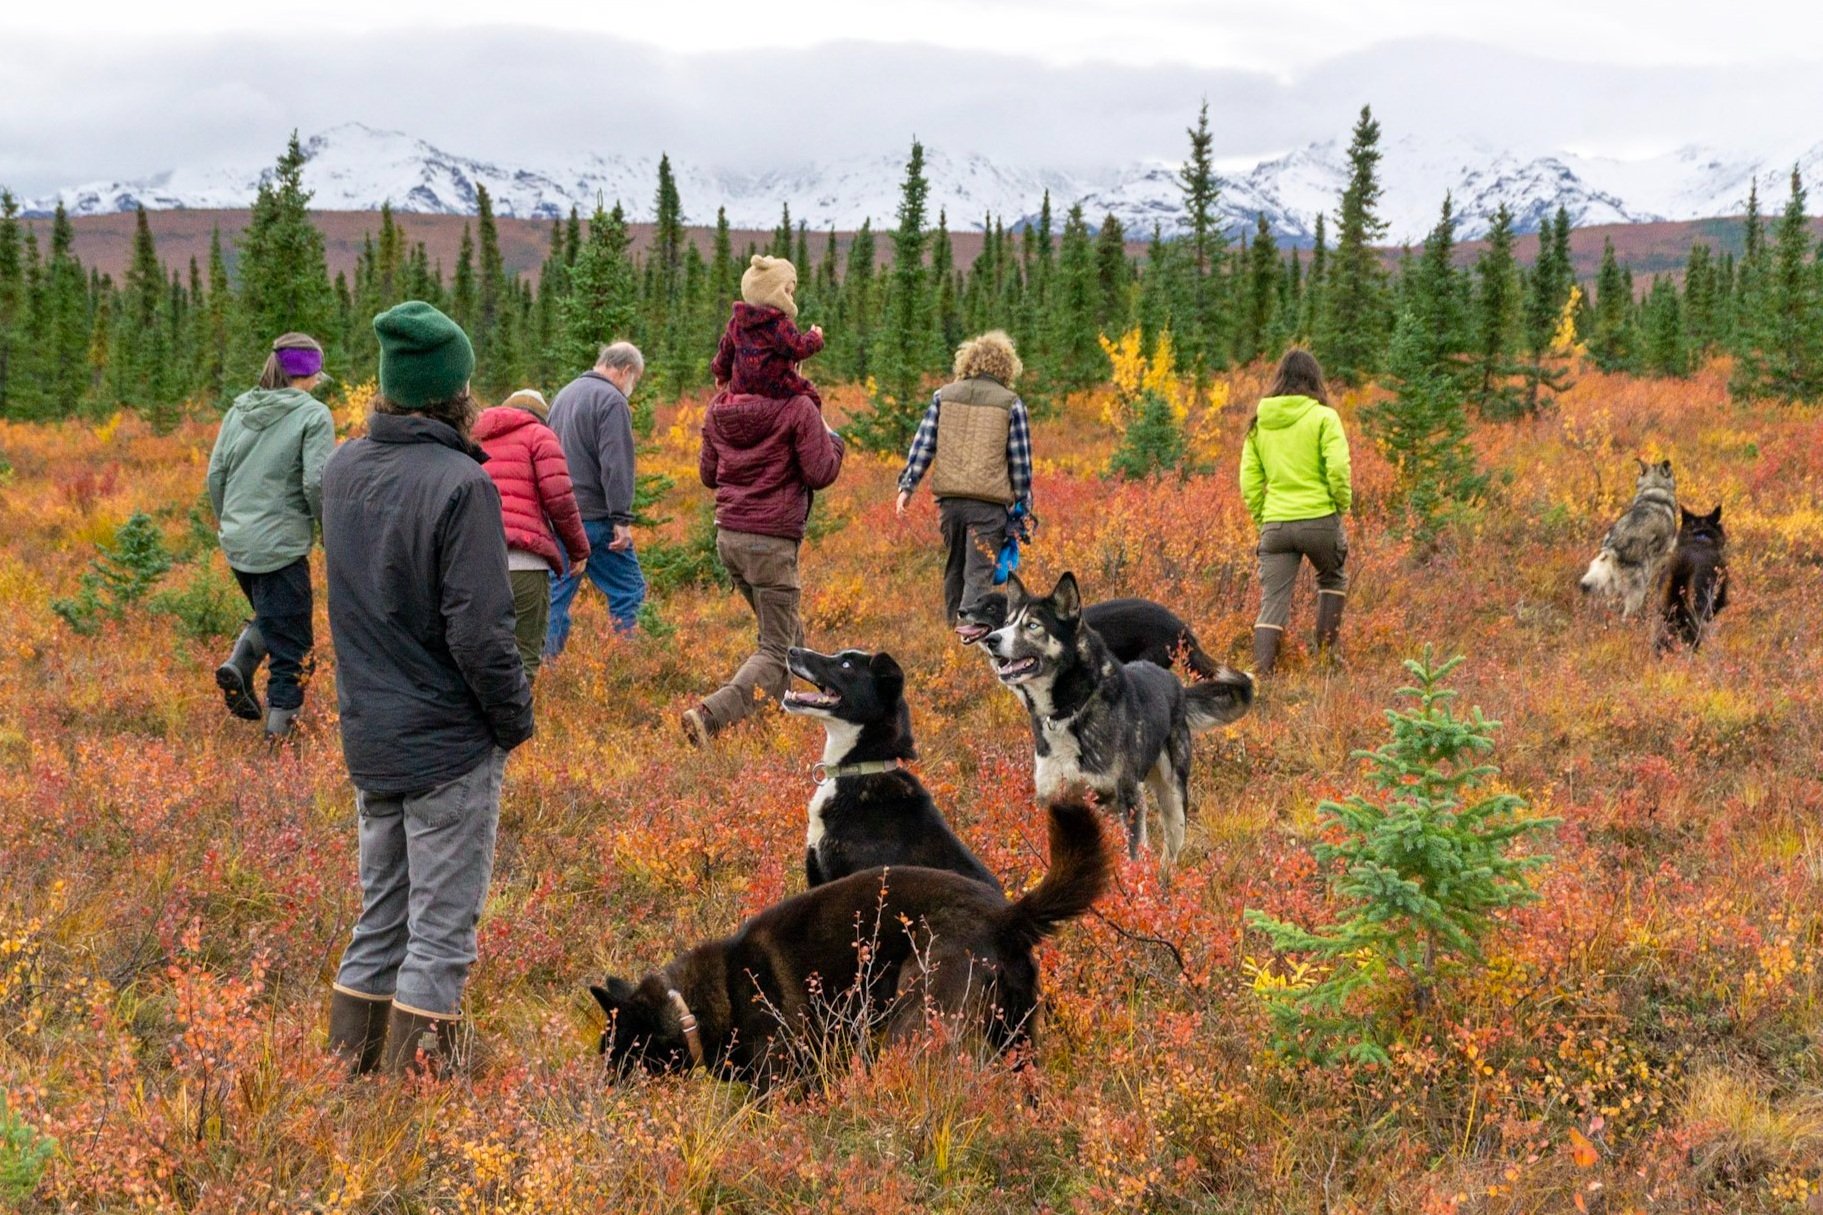 A group of 8 people of all ages and genders walks with Alaskan Husky sled dogs through a tundra landscape toward mountains in Denali National Park